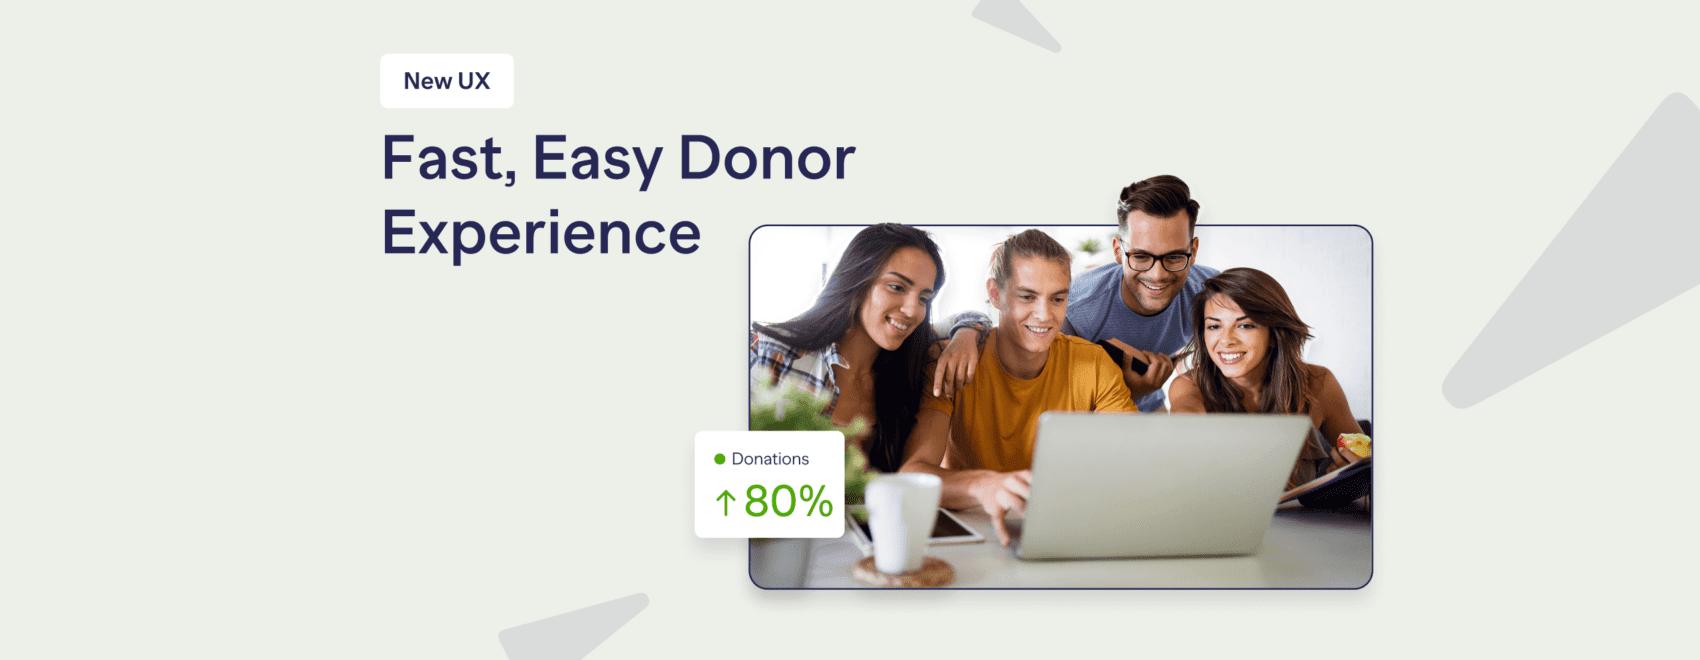 NEW UX Fast, Easy Donor Experience